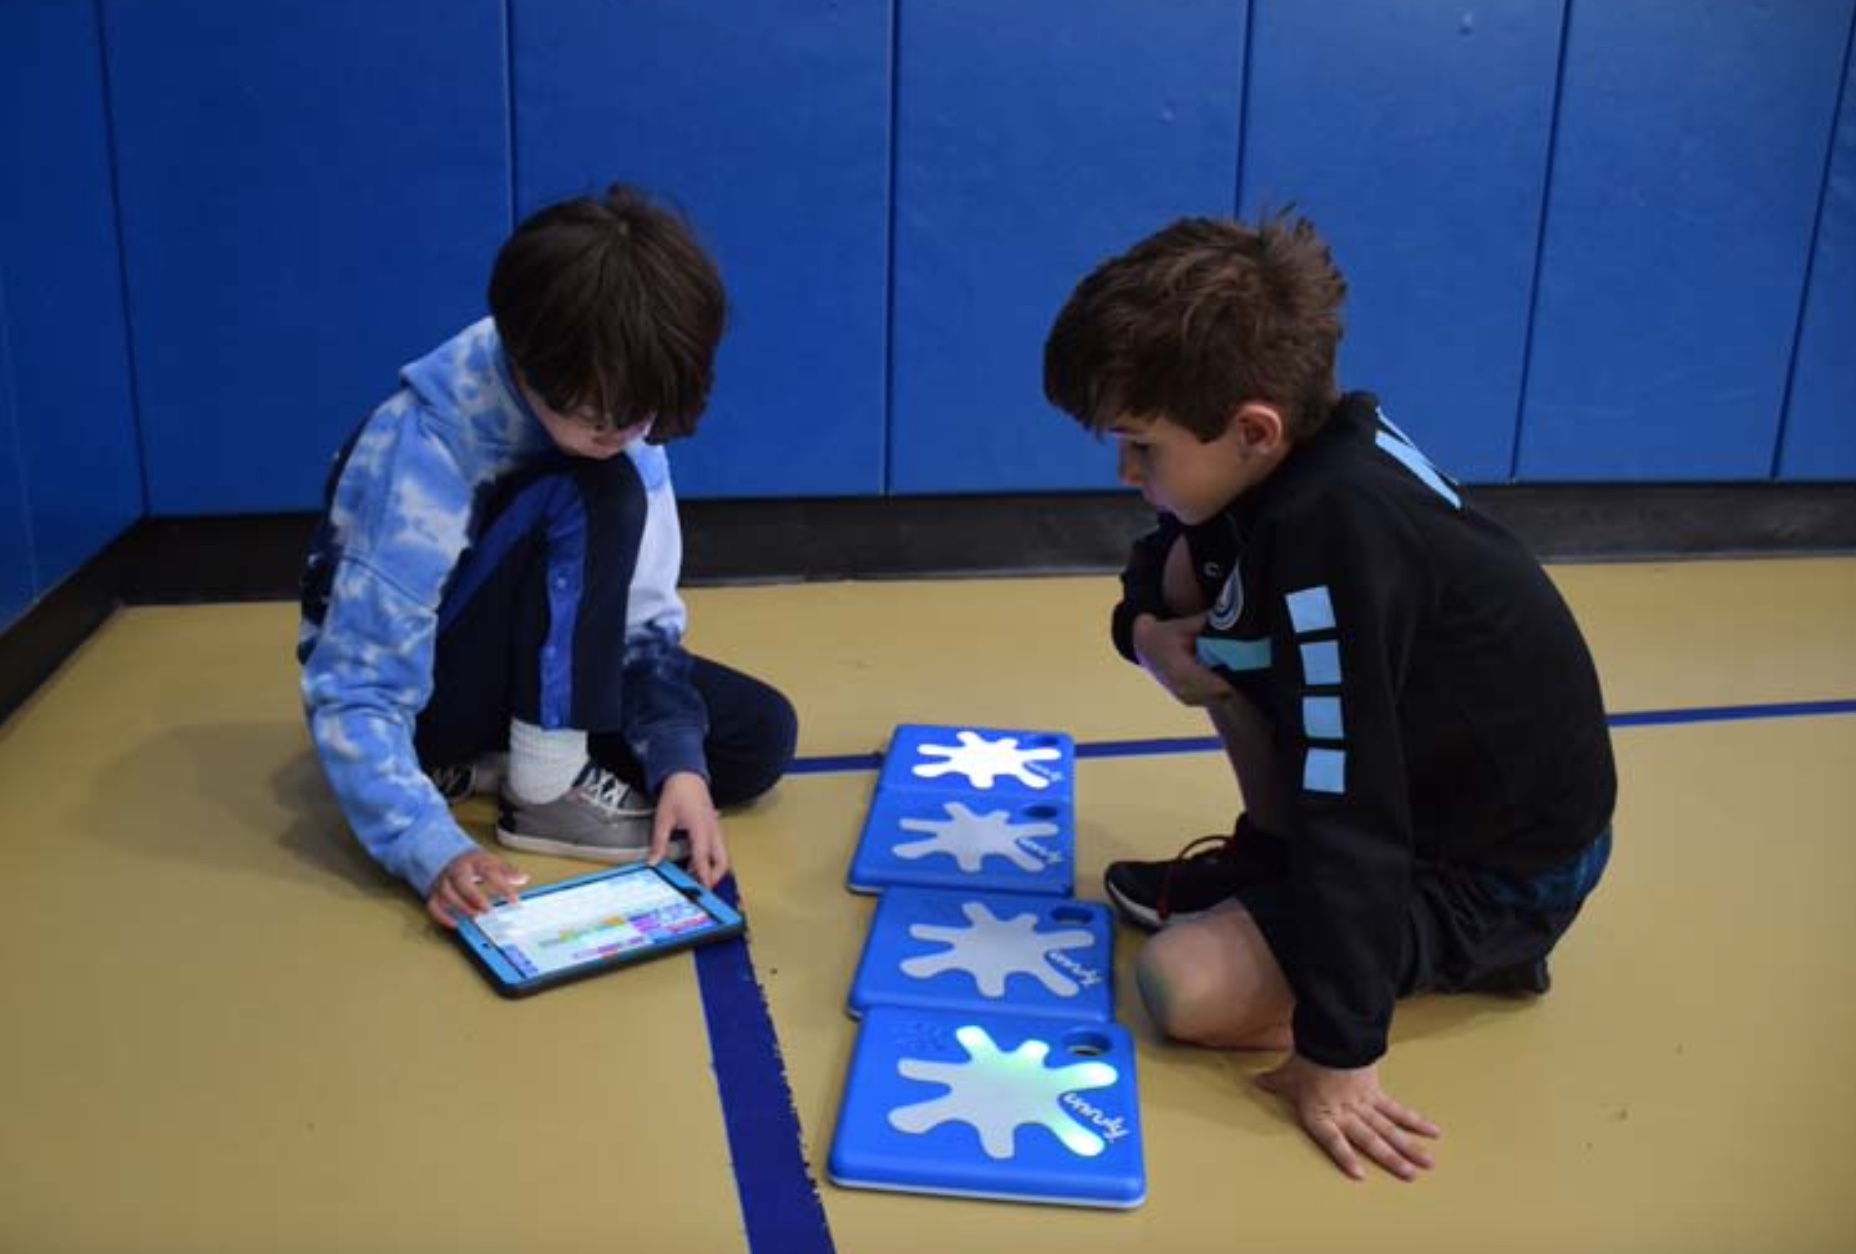 Third Graders Code Active Games for Younger Students